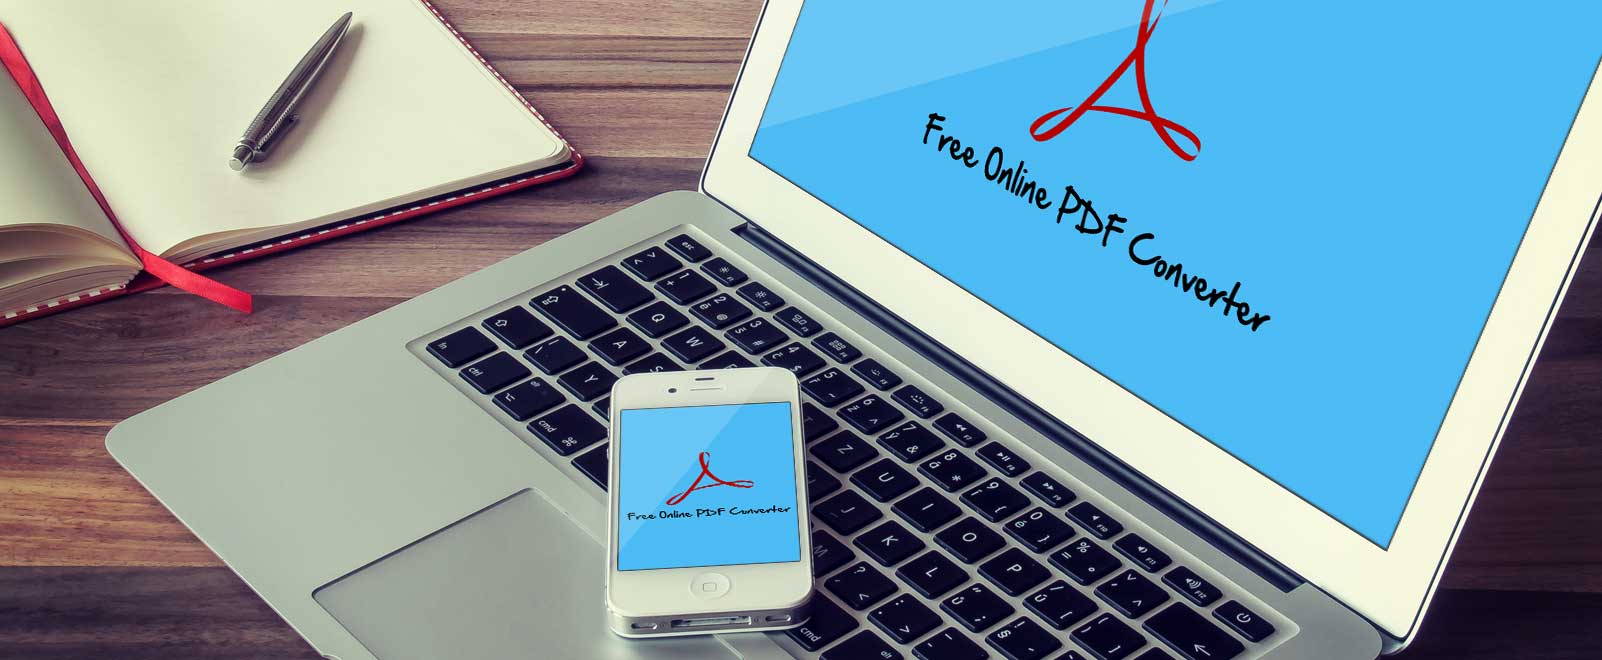 Free Online PDF Converter that really works – Free and Easy